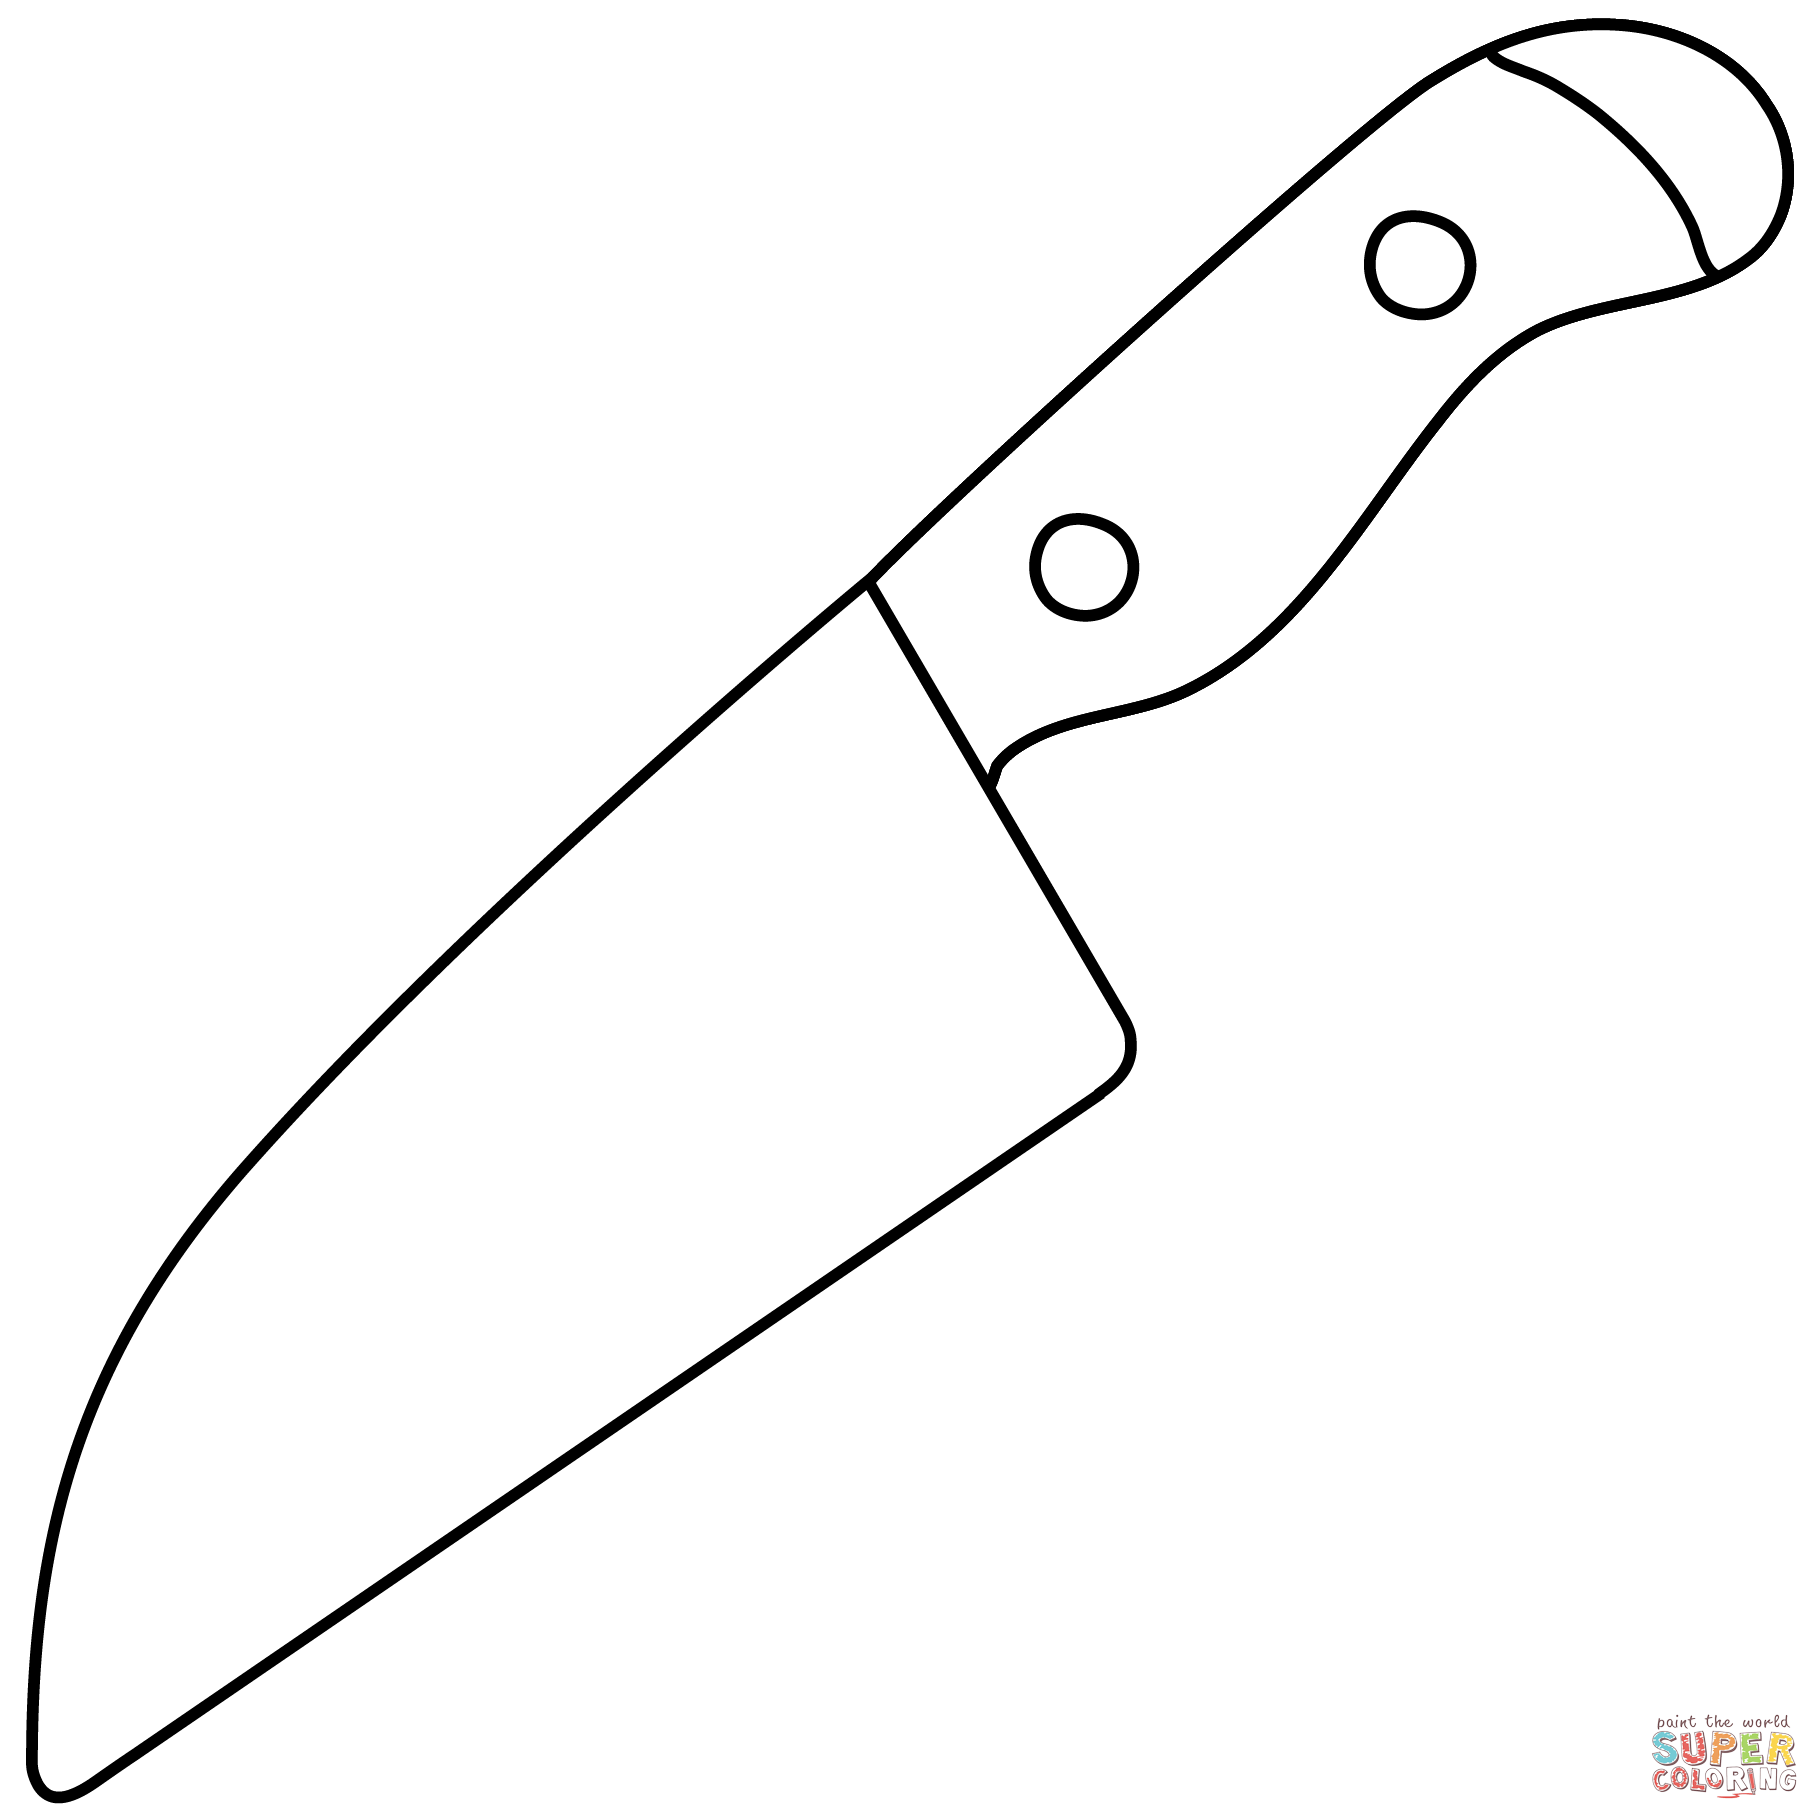 Kitchen knife emoji coloring page free printable coloring pages